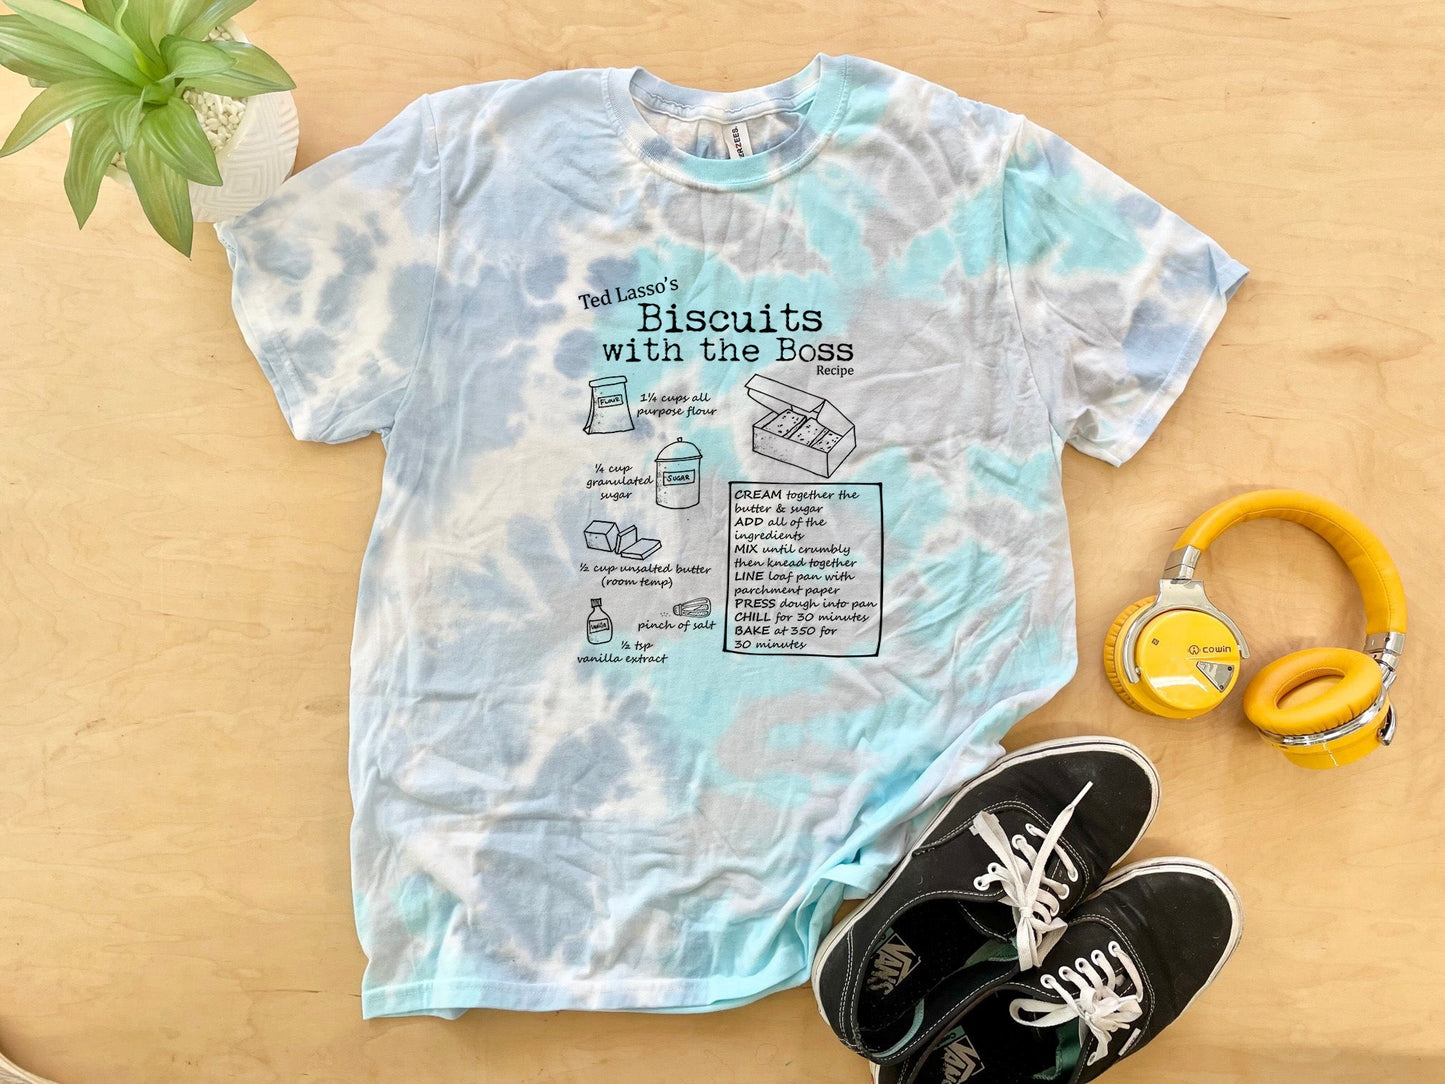 Biscuits With The Boss (Ted Lasso) - Mens/Unisex Tie Dye Tee - Blue